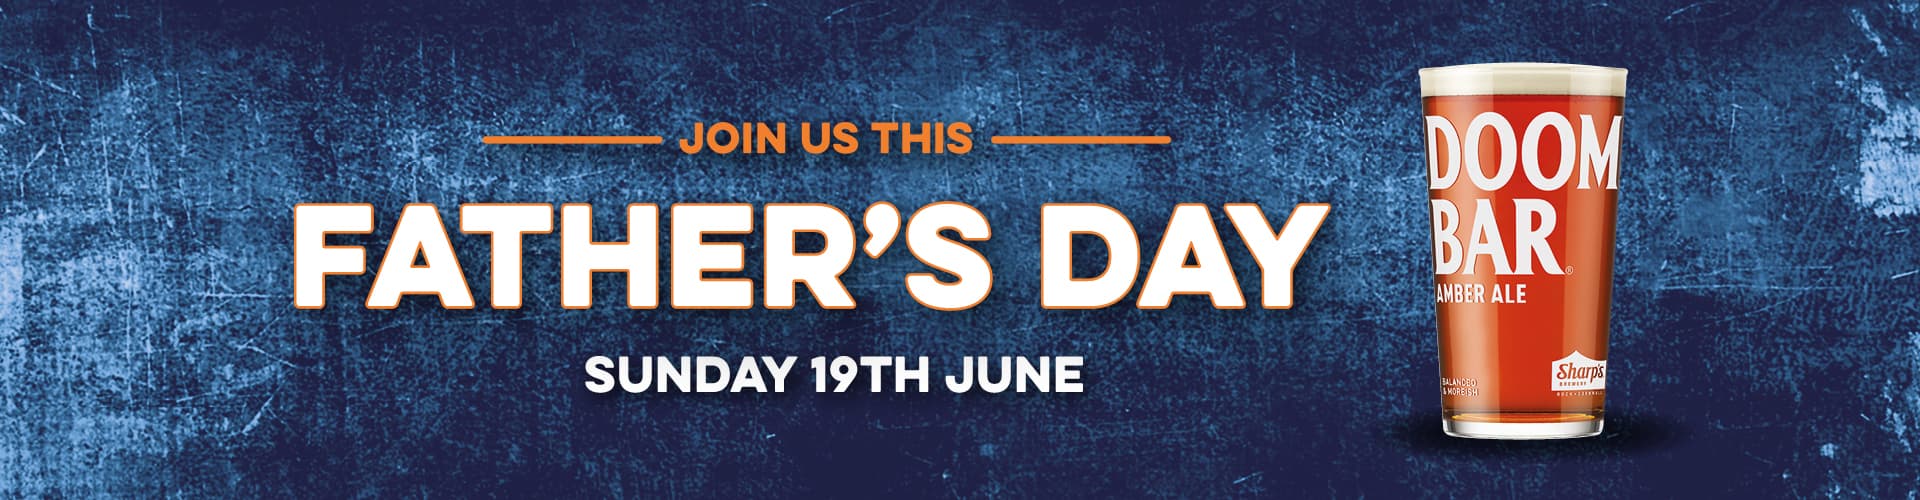 Father's Day at The Cricketers pub in Taunton